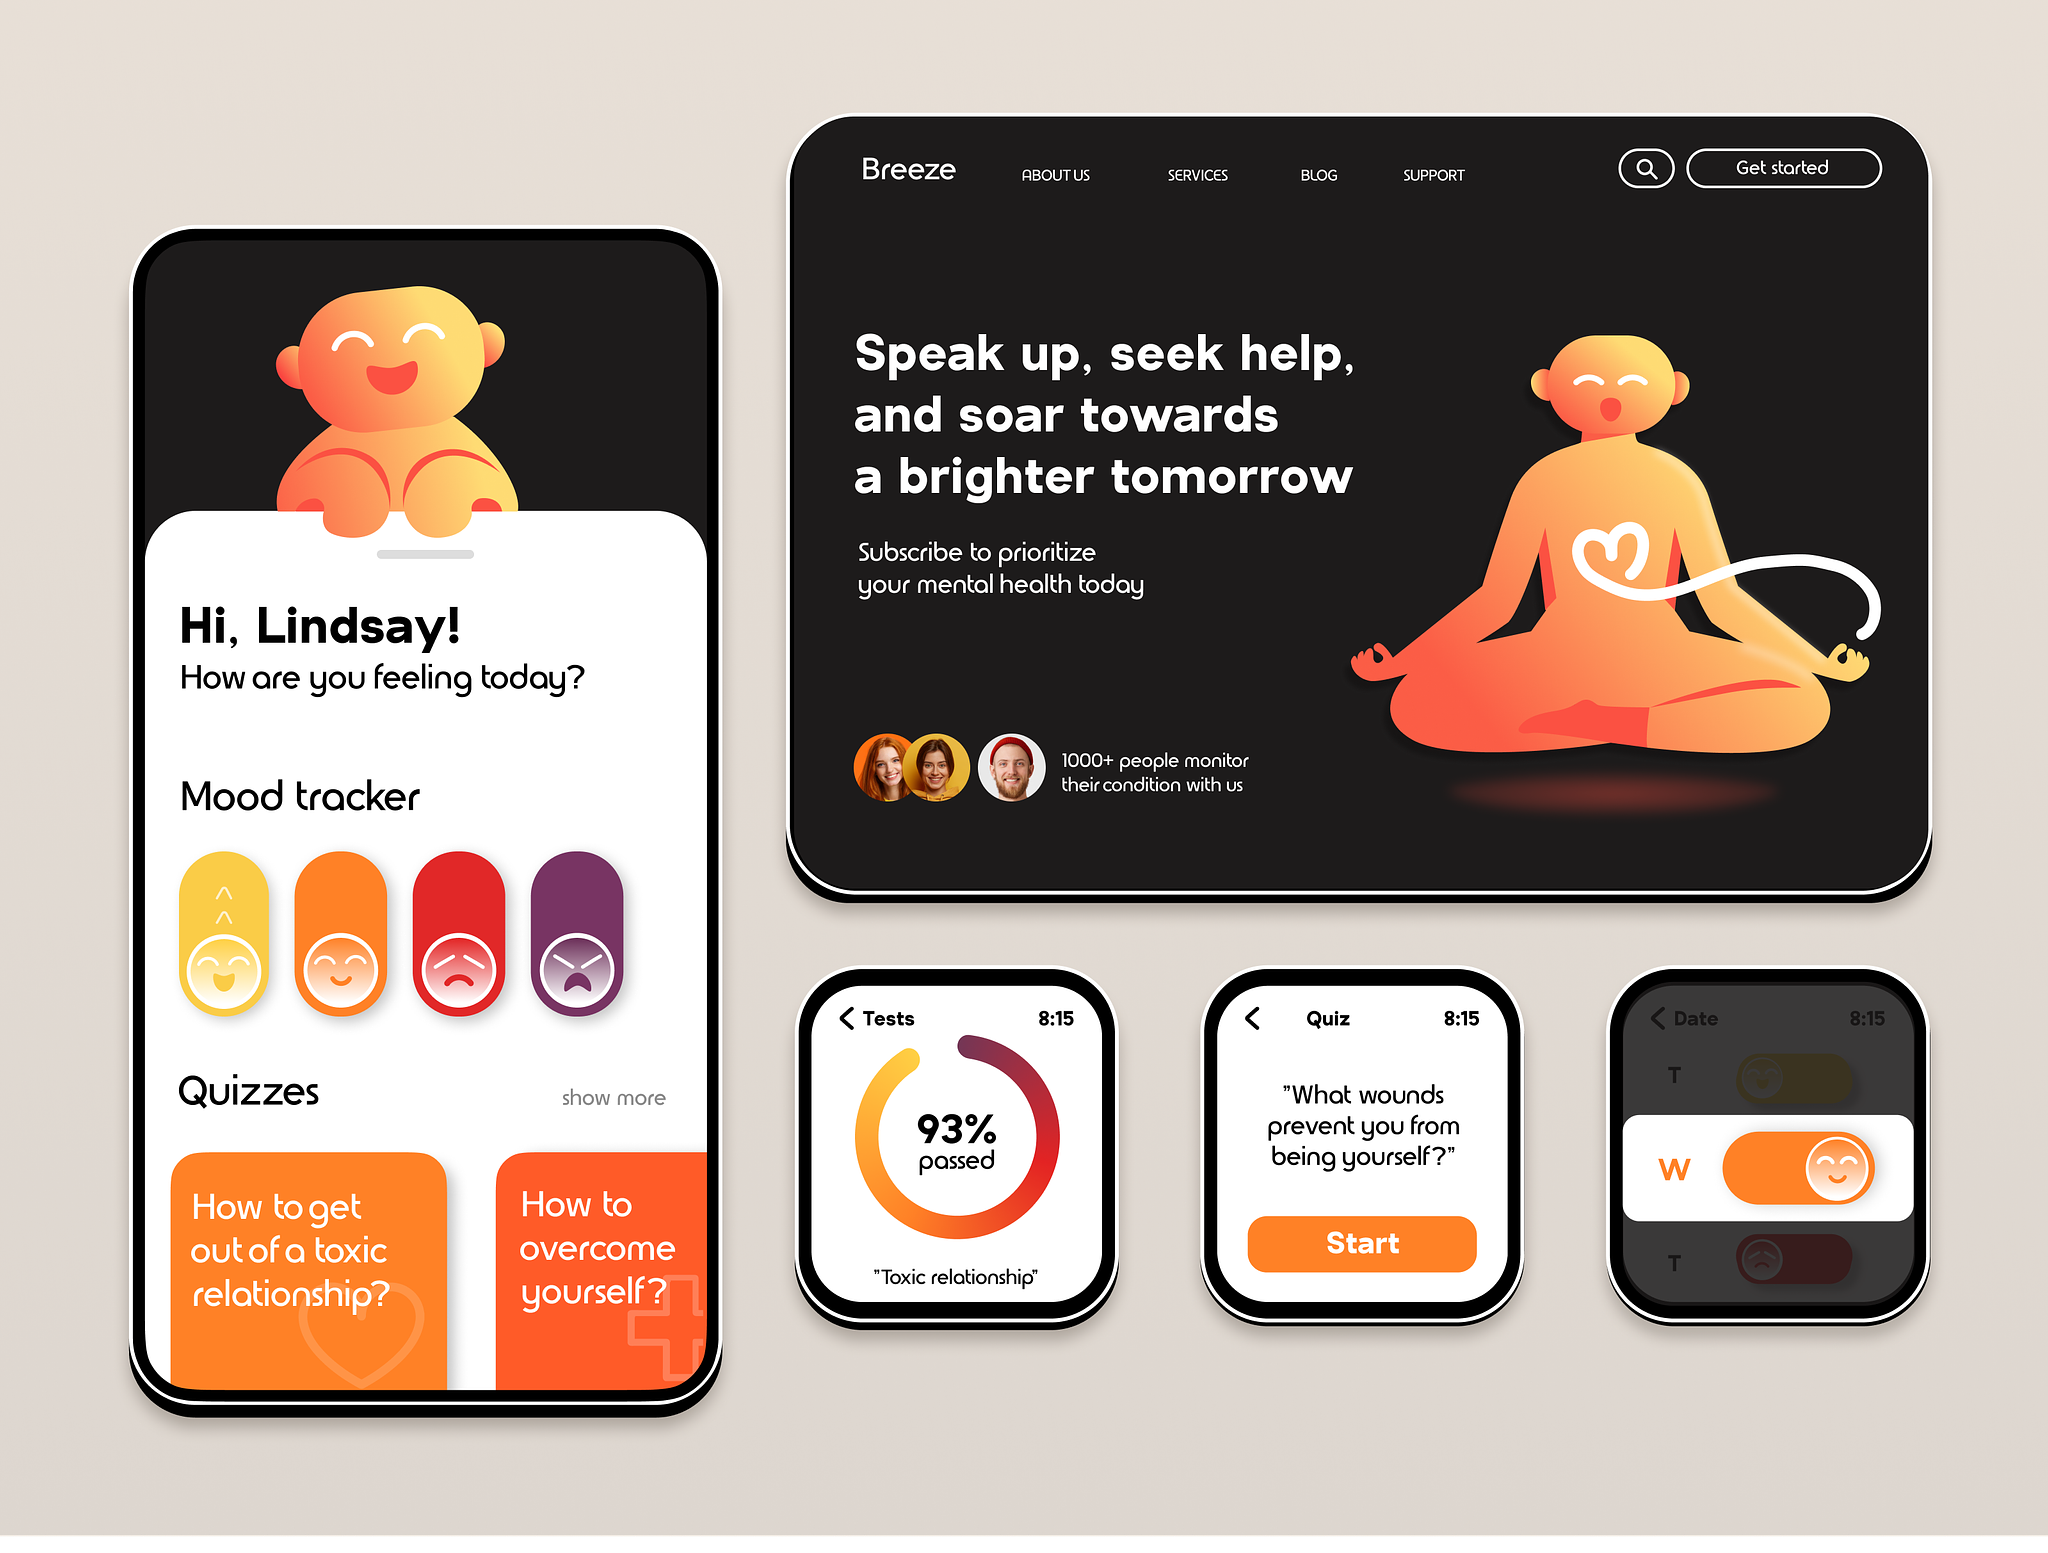 Mental health app development can increase user engagement and encourage people to self help for anxiety or any other mental illness (*image by [Kieron Keenan](https://dribbble.com/KieronKeenan){ rel="nofollow" target="_blank" .default-md}*)